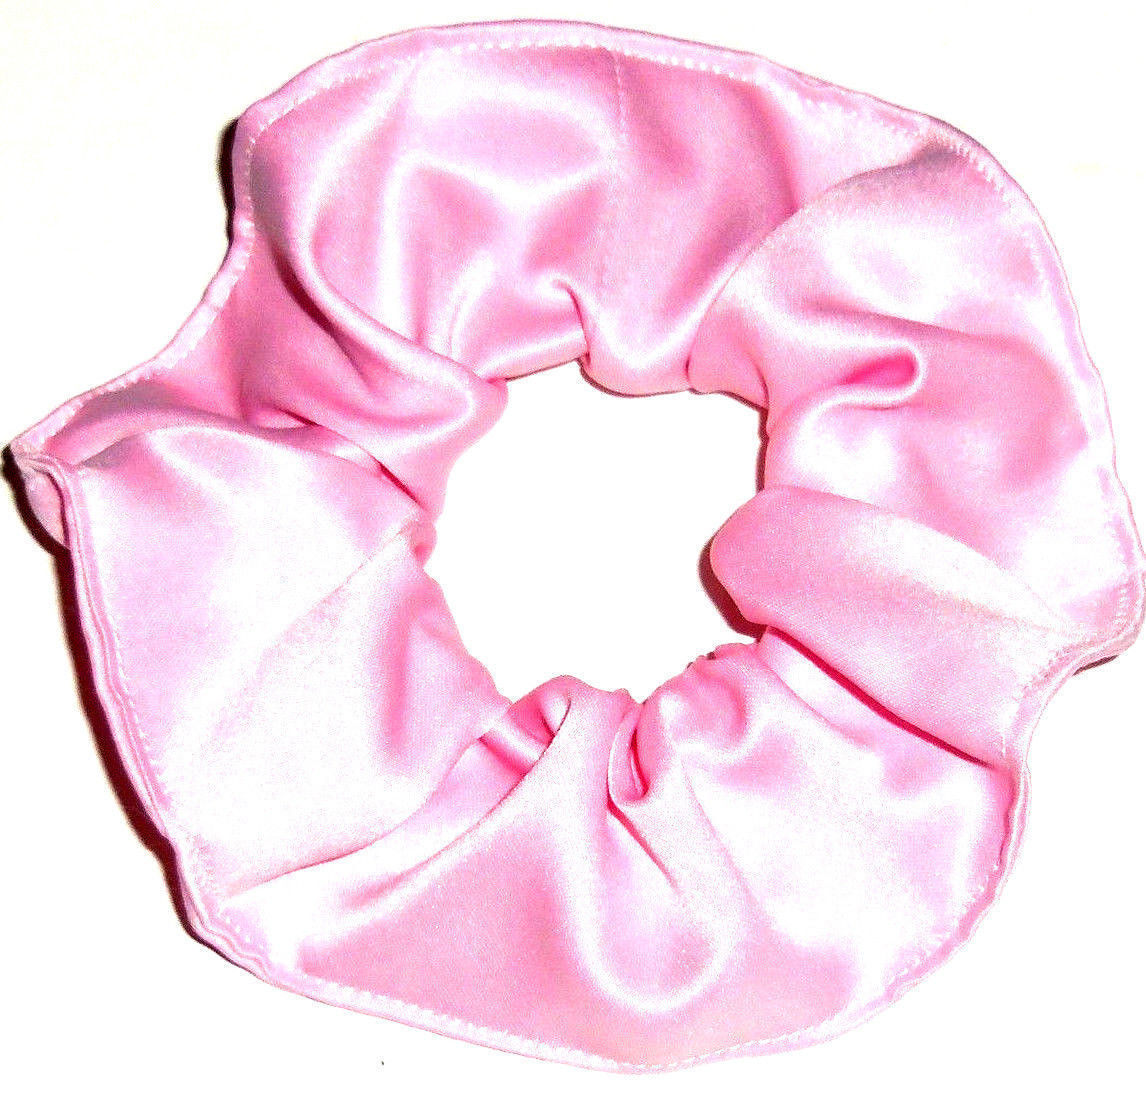 Primary image for Pink Satin Hair Scrunchie Scrunchies by Sherry Ponytail Holder Tie